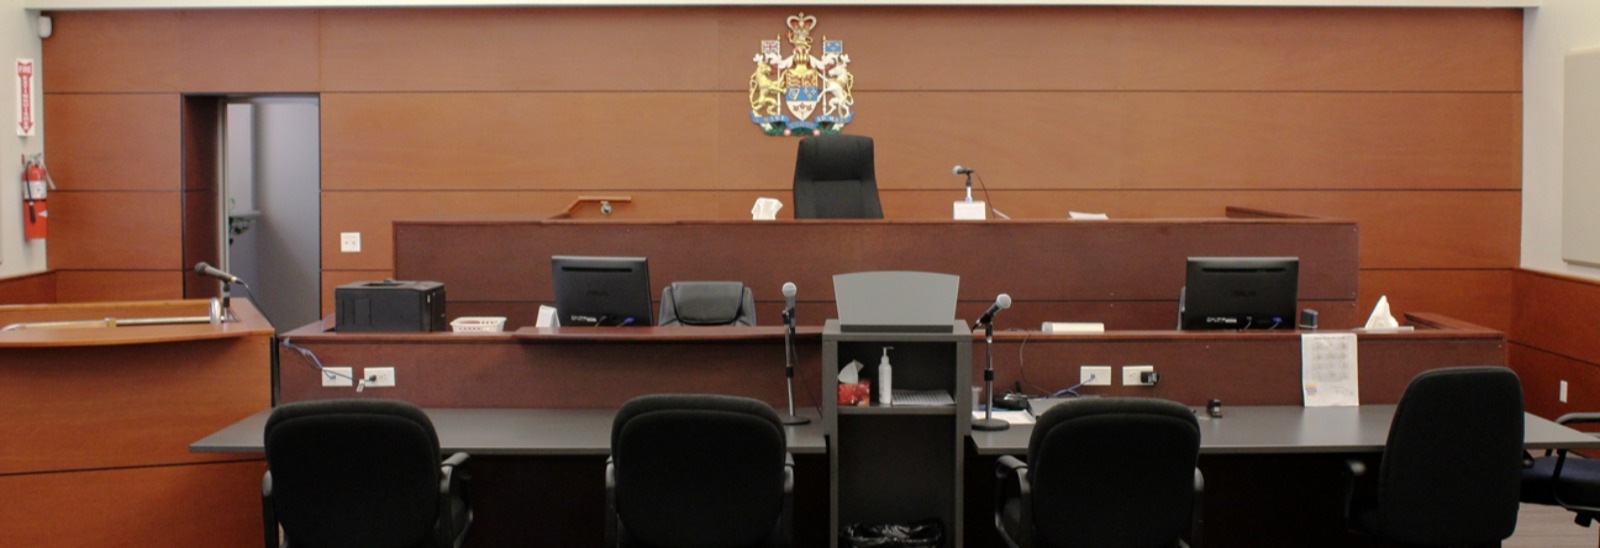 interior view of the POA courtroom